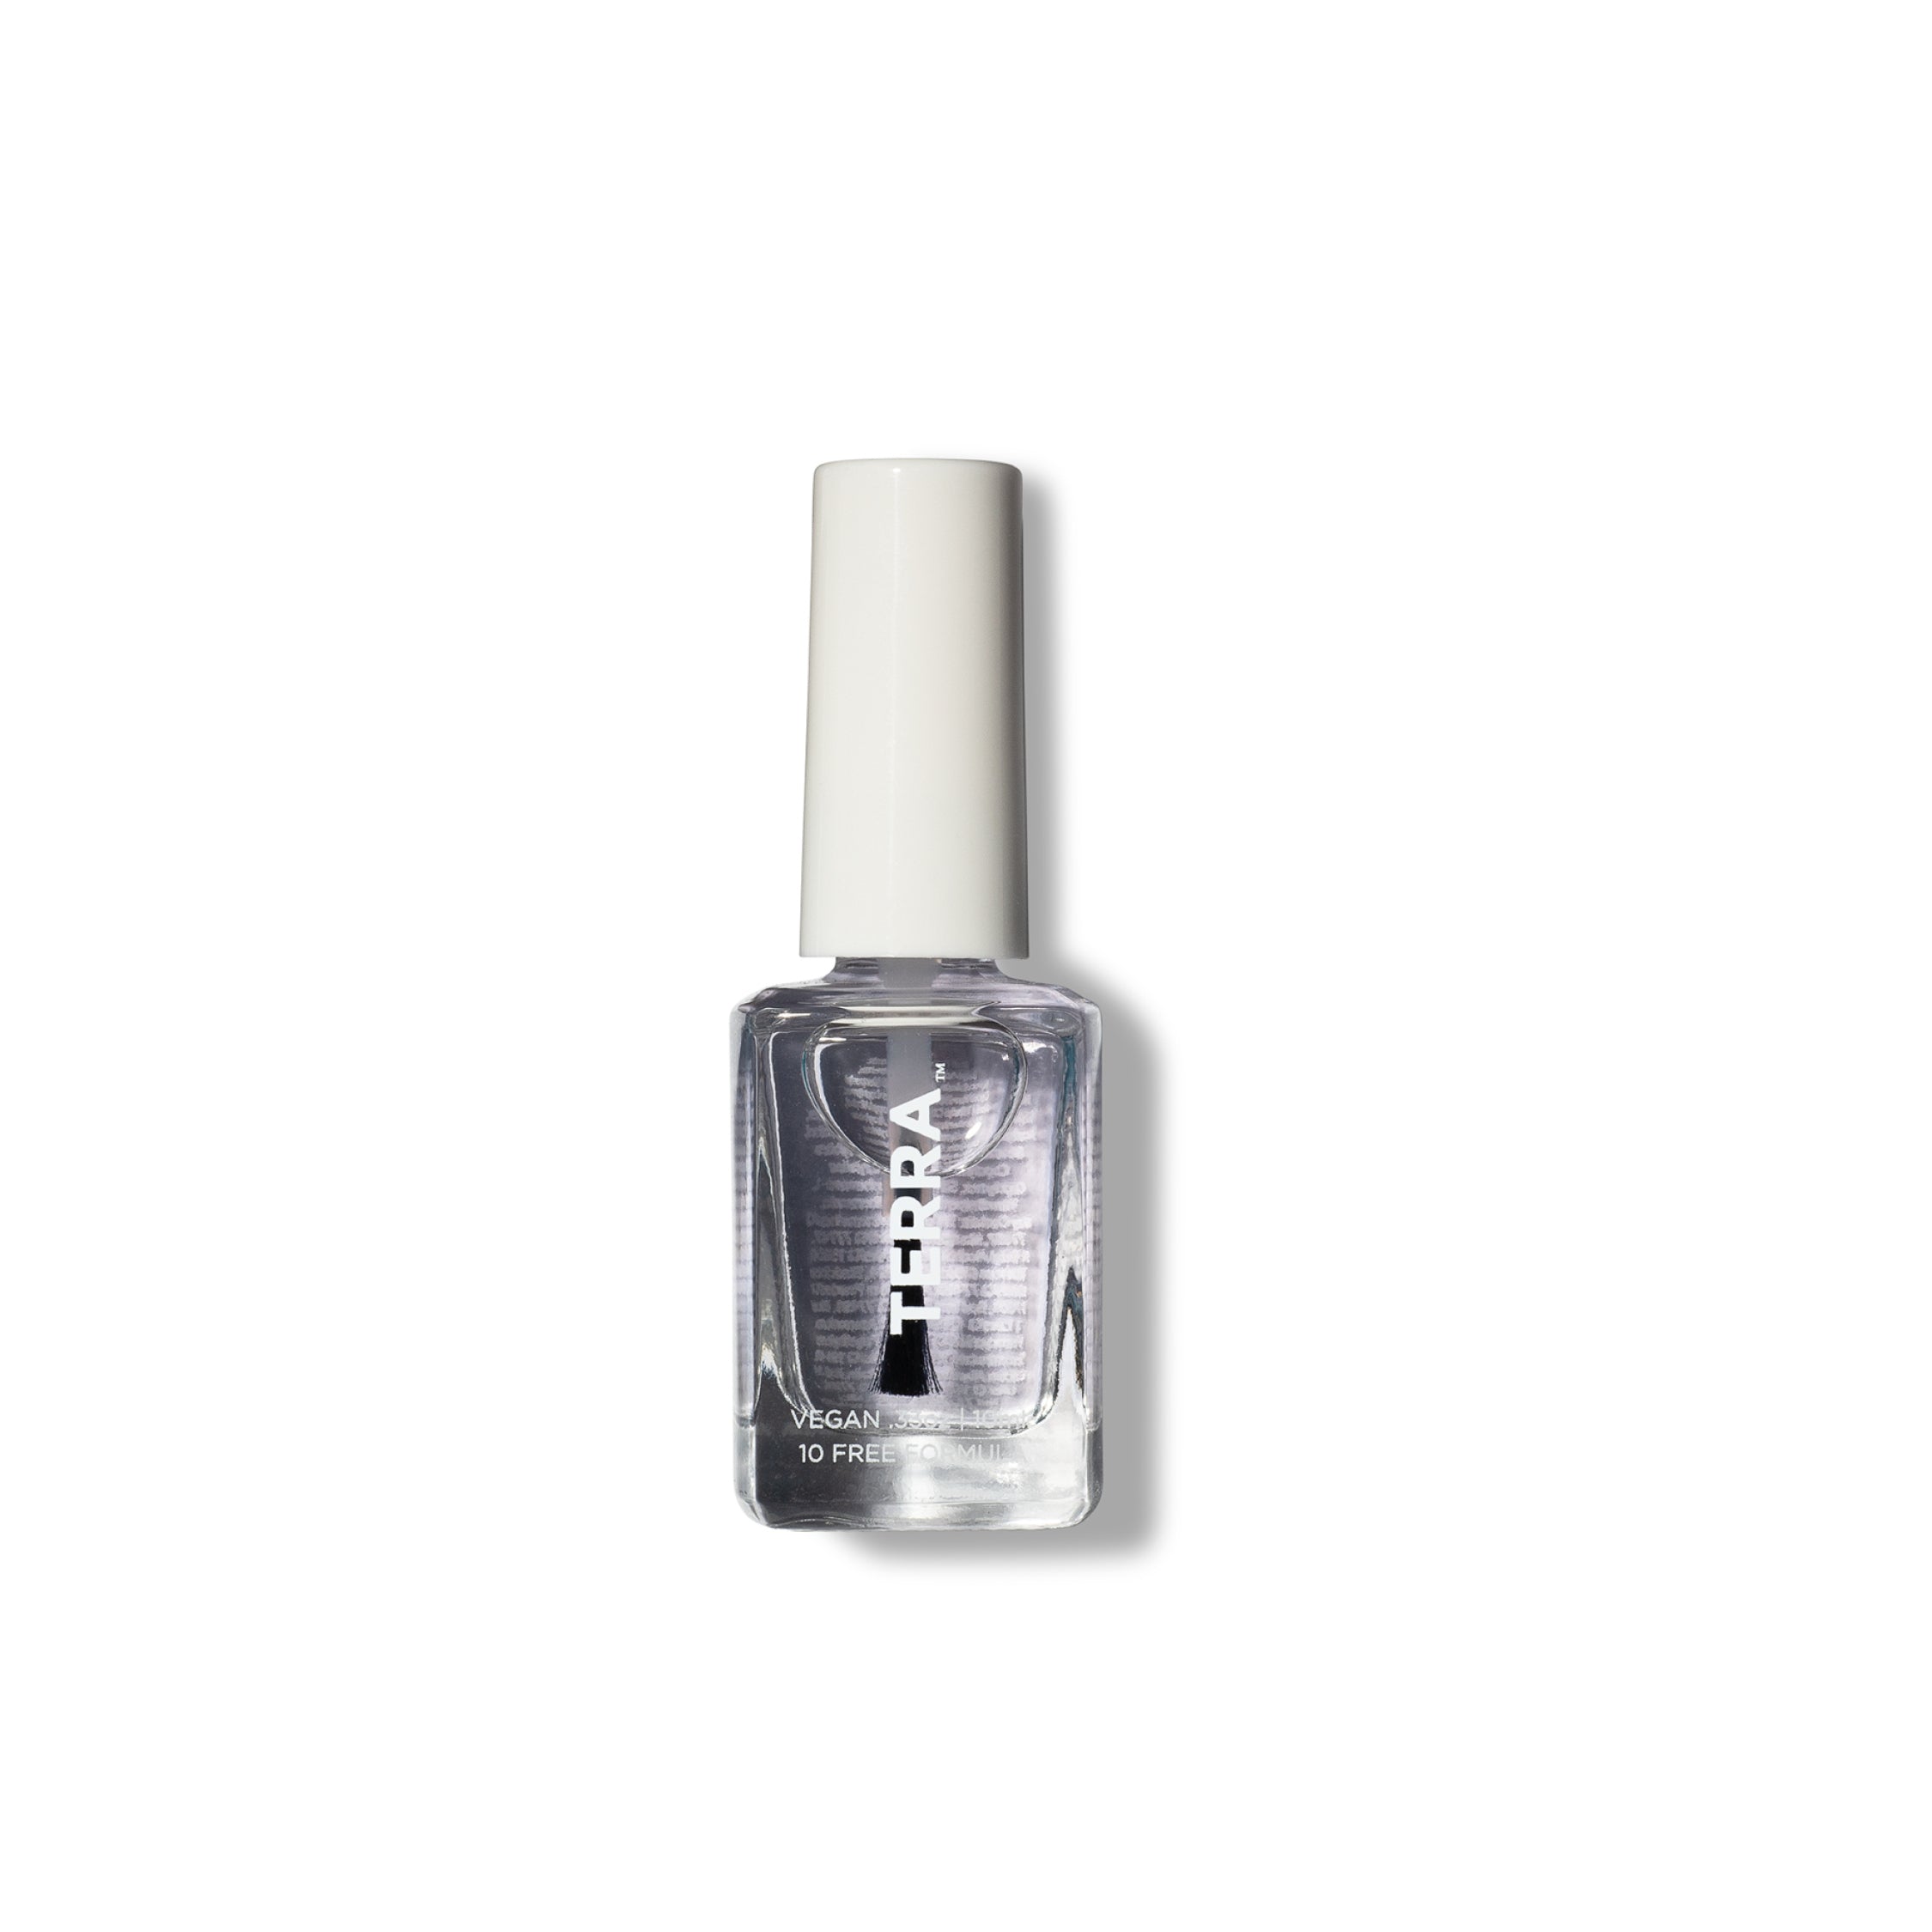 Transparent Nail Polish: Buy Transparent Nail Polish Online at Low Prices  on Snapdeal.com